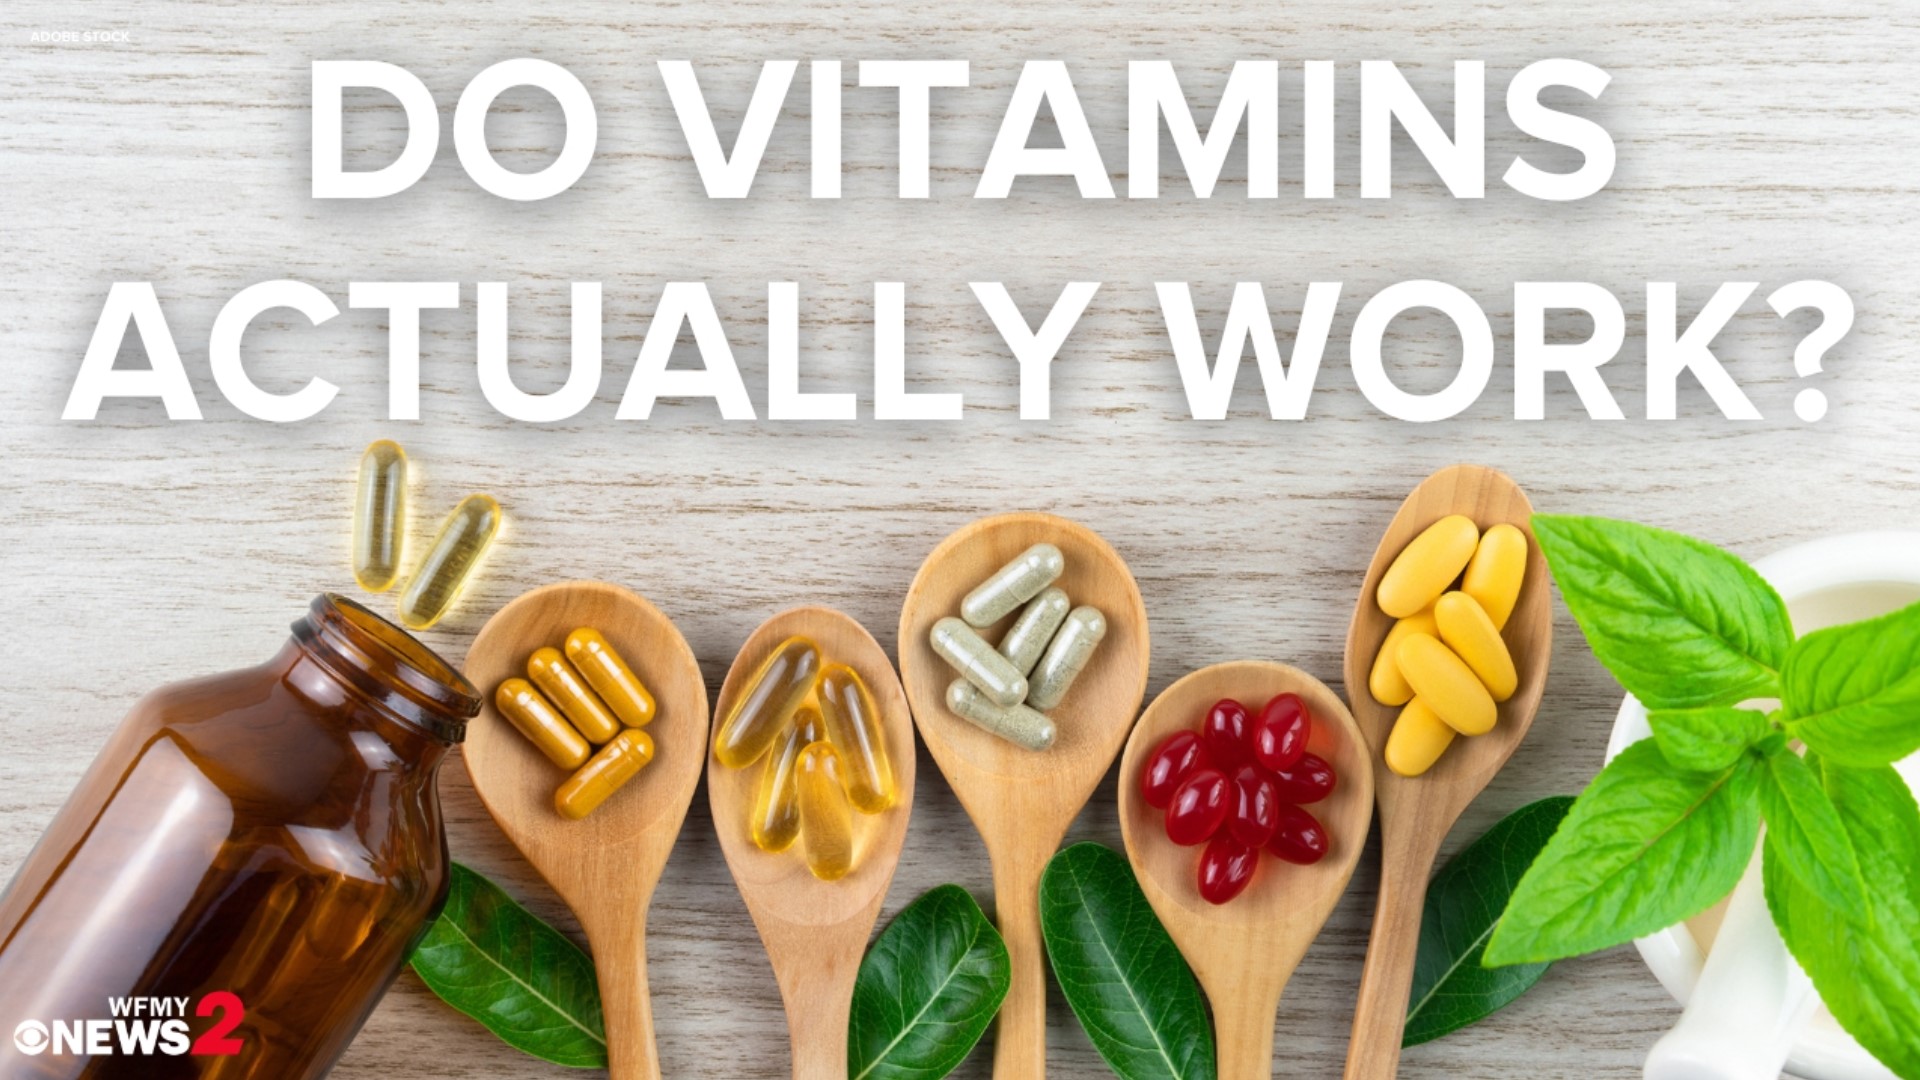 According to Consumer Reports, 60% of adults in the U.S. take at least one supplement every day.